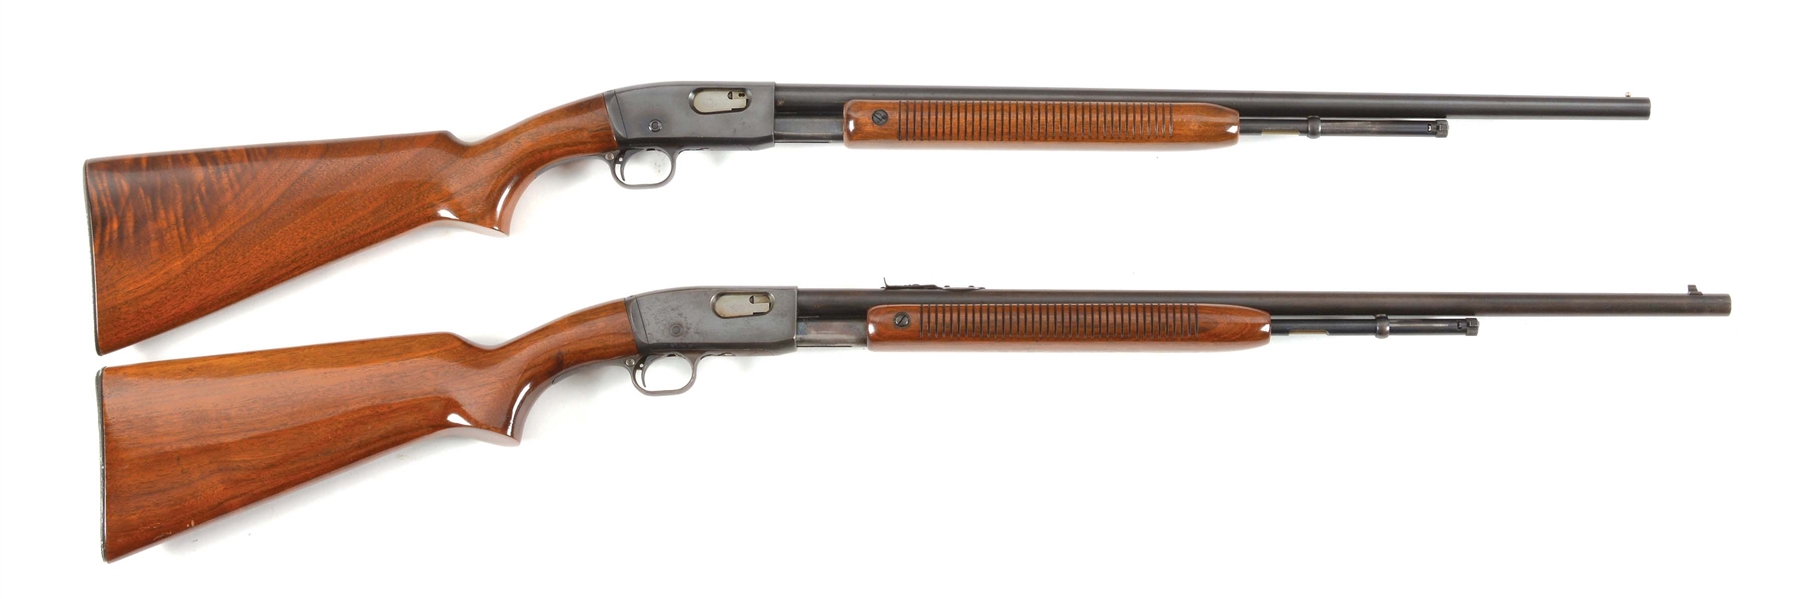 (C) LOT OF TWO: TWO REMINGTON SLIDE ACTION RIFLES.